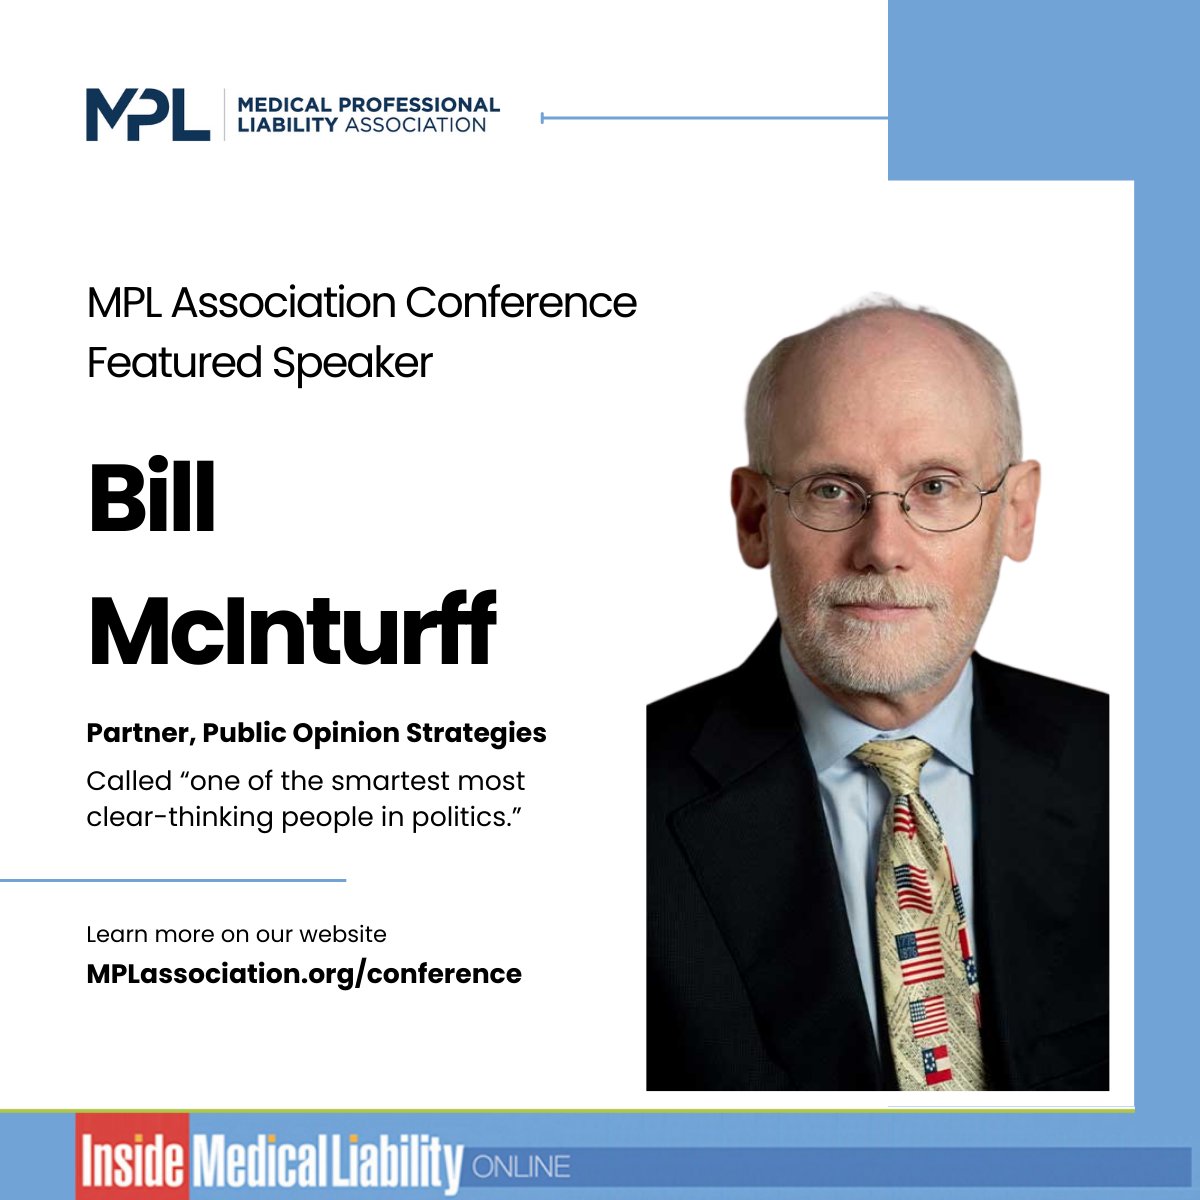 Don’t miss this insightful interview with @pollsterguy in advance of his featured presentation at the MPL Association Annual Conference on May 9: bit.ly/3SUWE2S